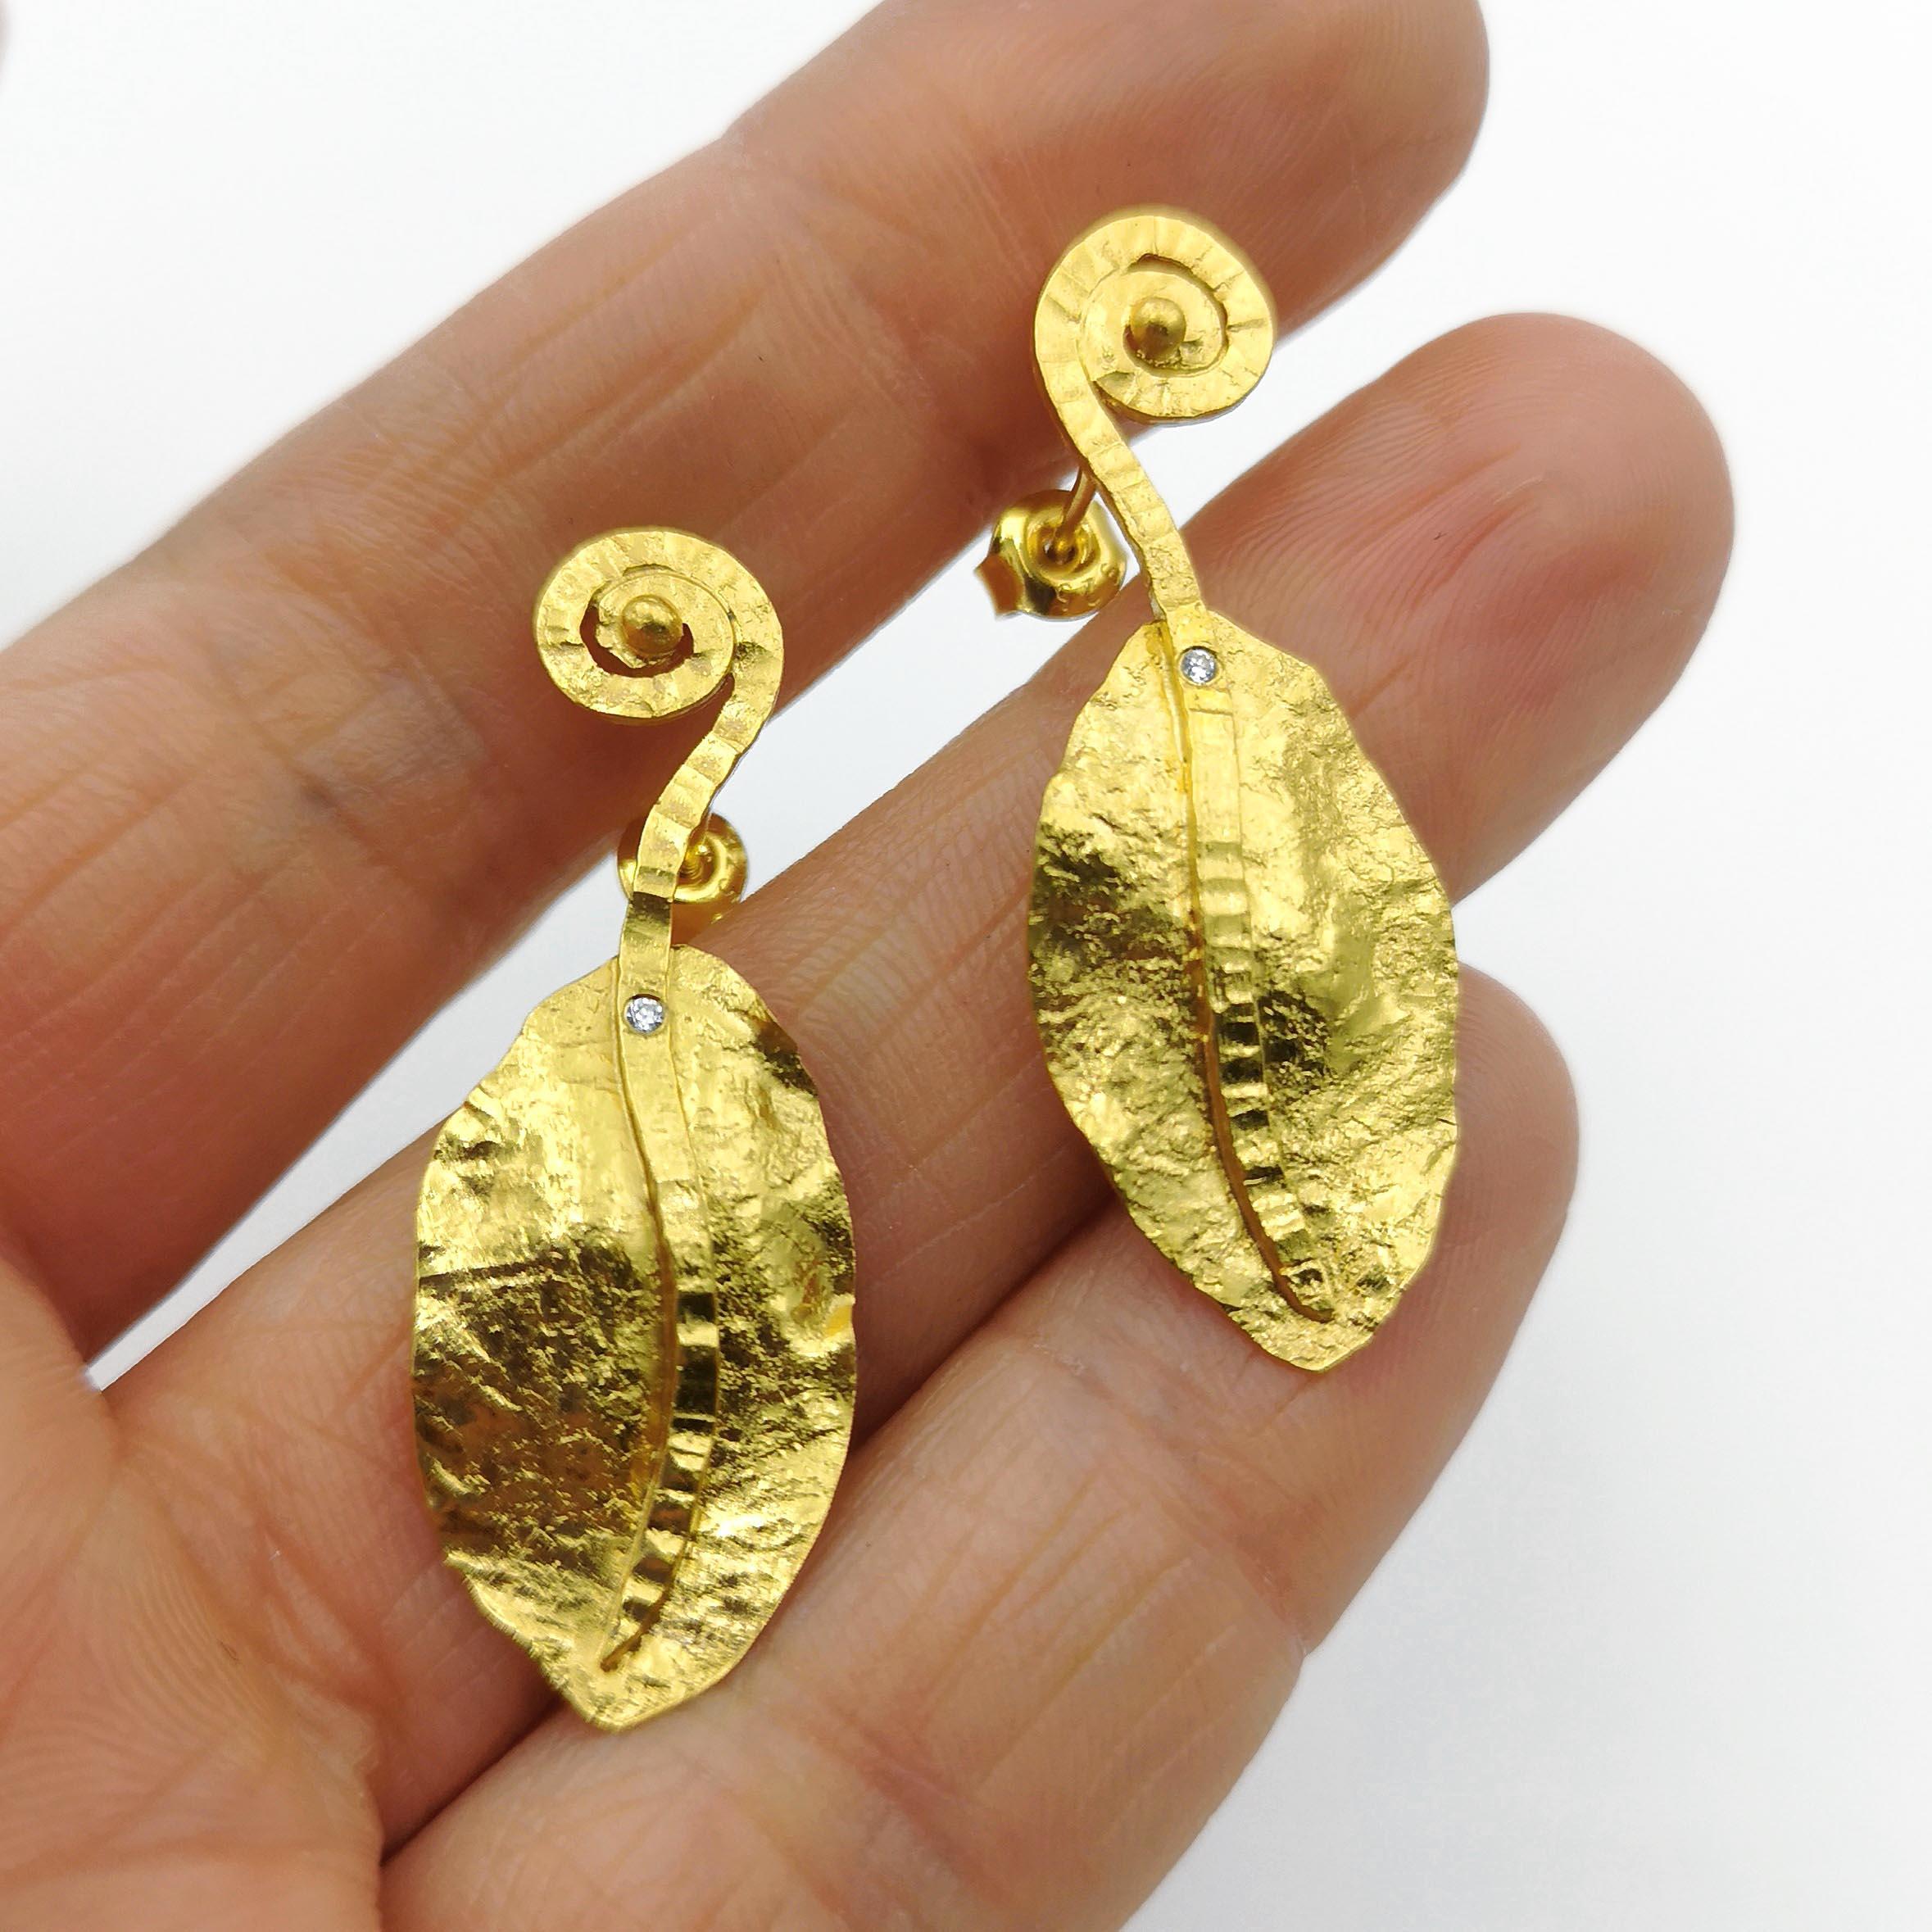 Zircon 24K Gold Plate Silver Contemporary Modern Artist Design Stud Earrings
Hand made earrings inspired by archeology, ancient cultures.
Hammered wavy leaves decorated with cubic zirconia (1.2mm) made of gilded silver. The uneven surface shows the